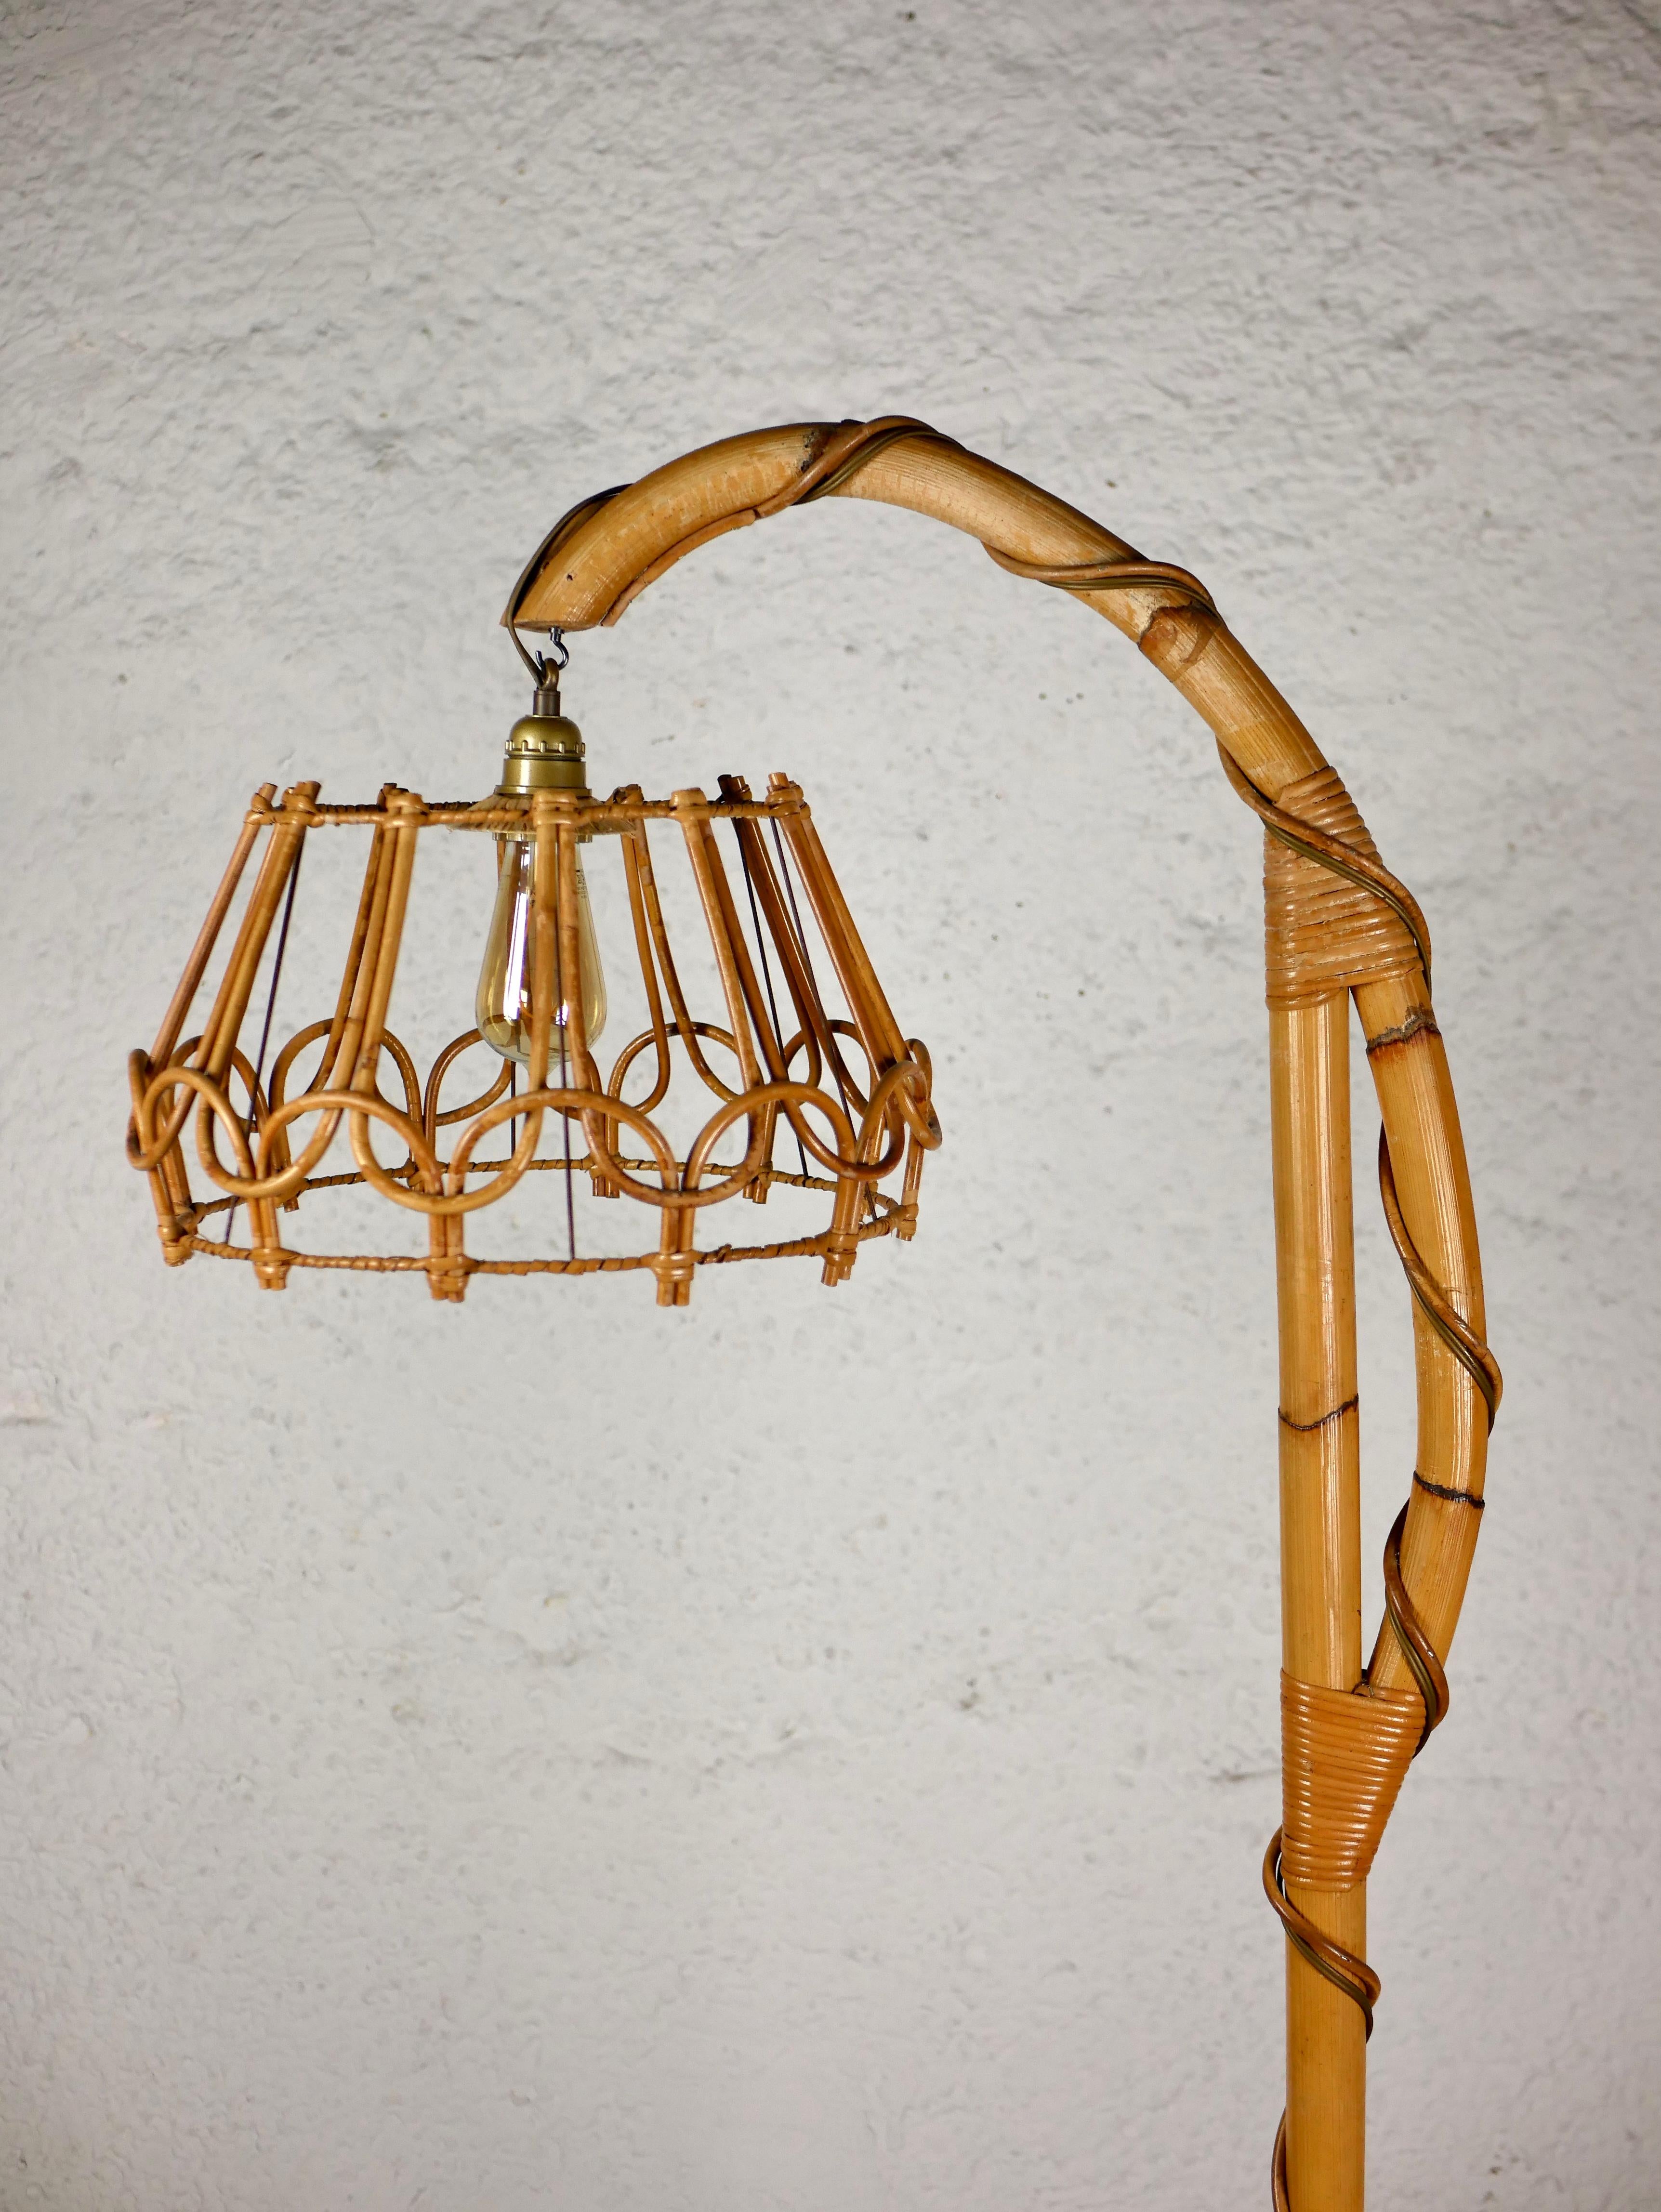 Rare and beautifully made rattan floor lamp attributed to Louis Sognot, made in France during the 1960s.
Beautiful details, a unique mix of delicacy and exoticism.